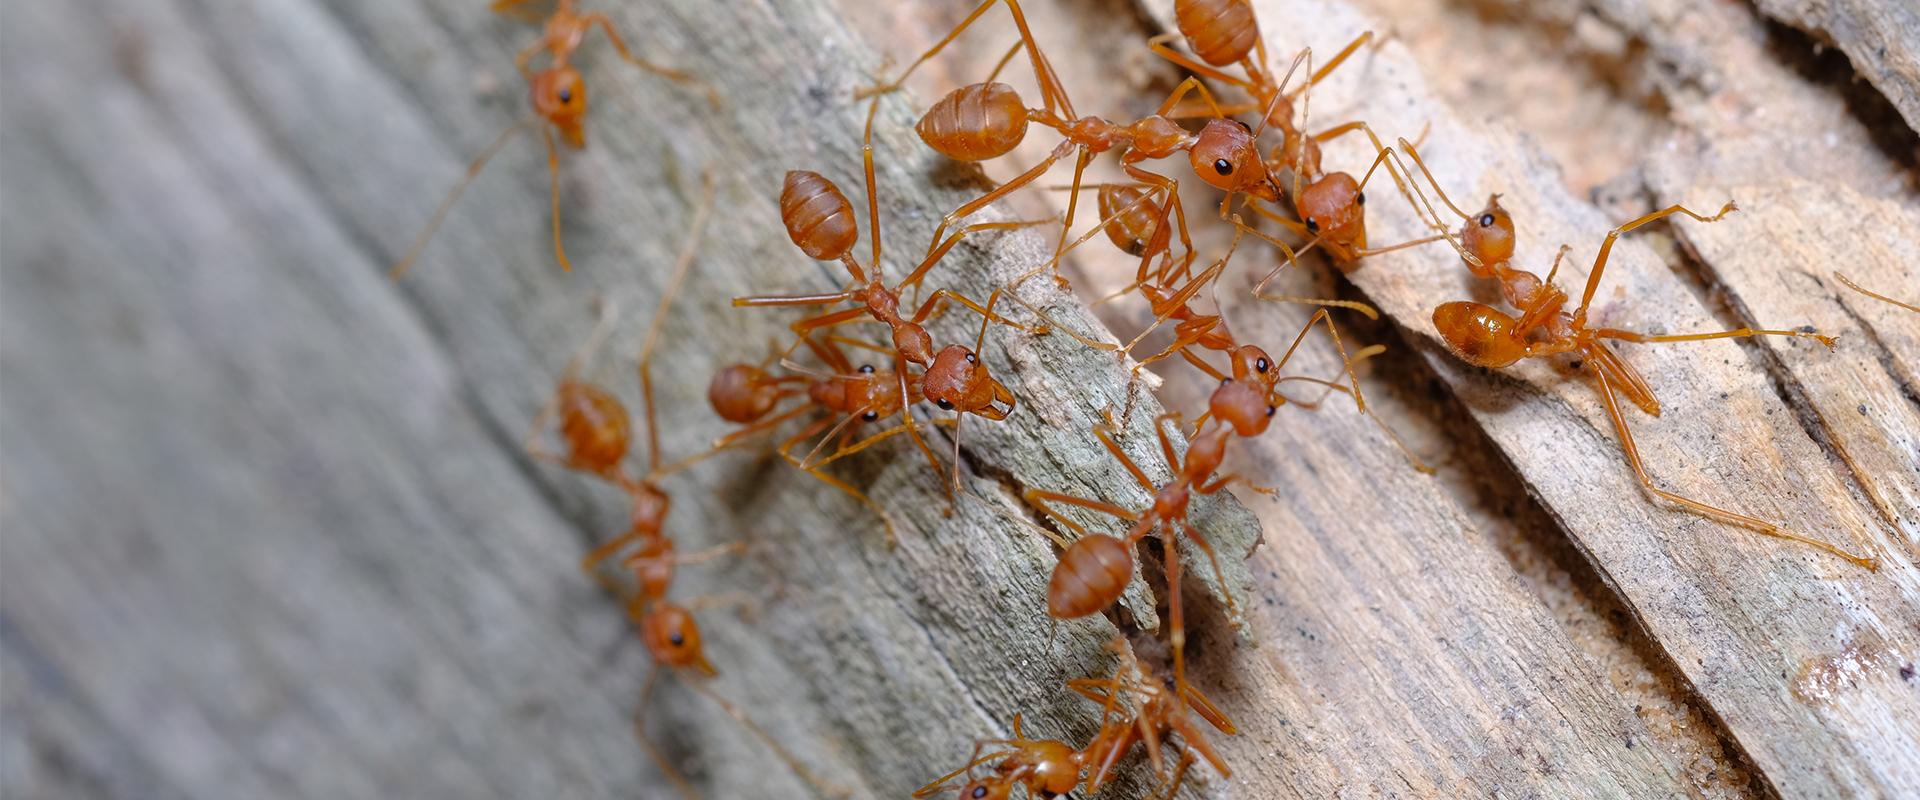 red imported fire ants on a log